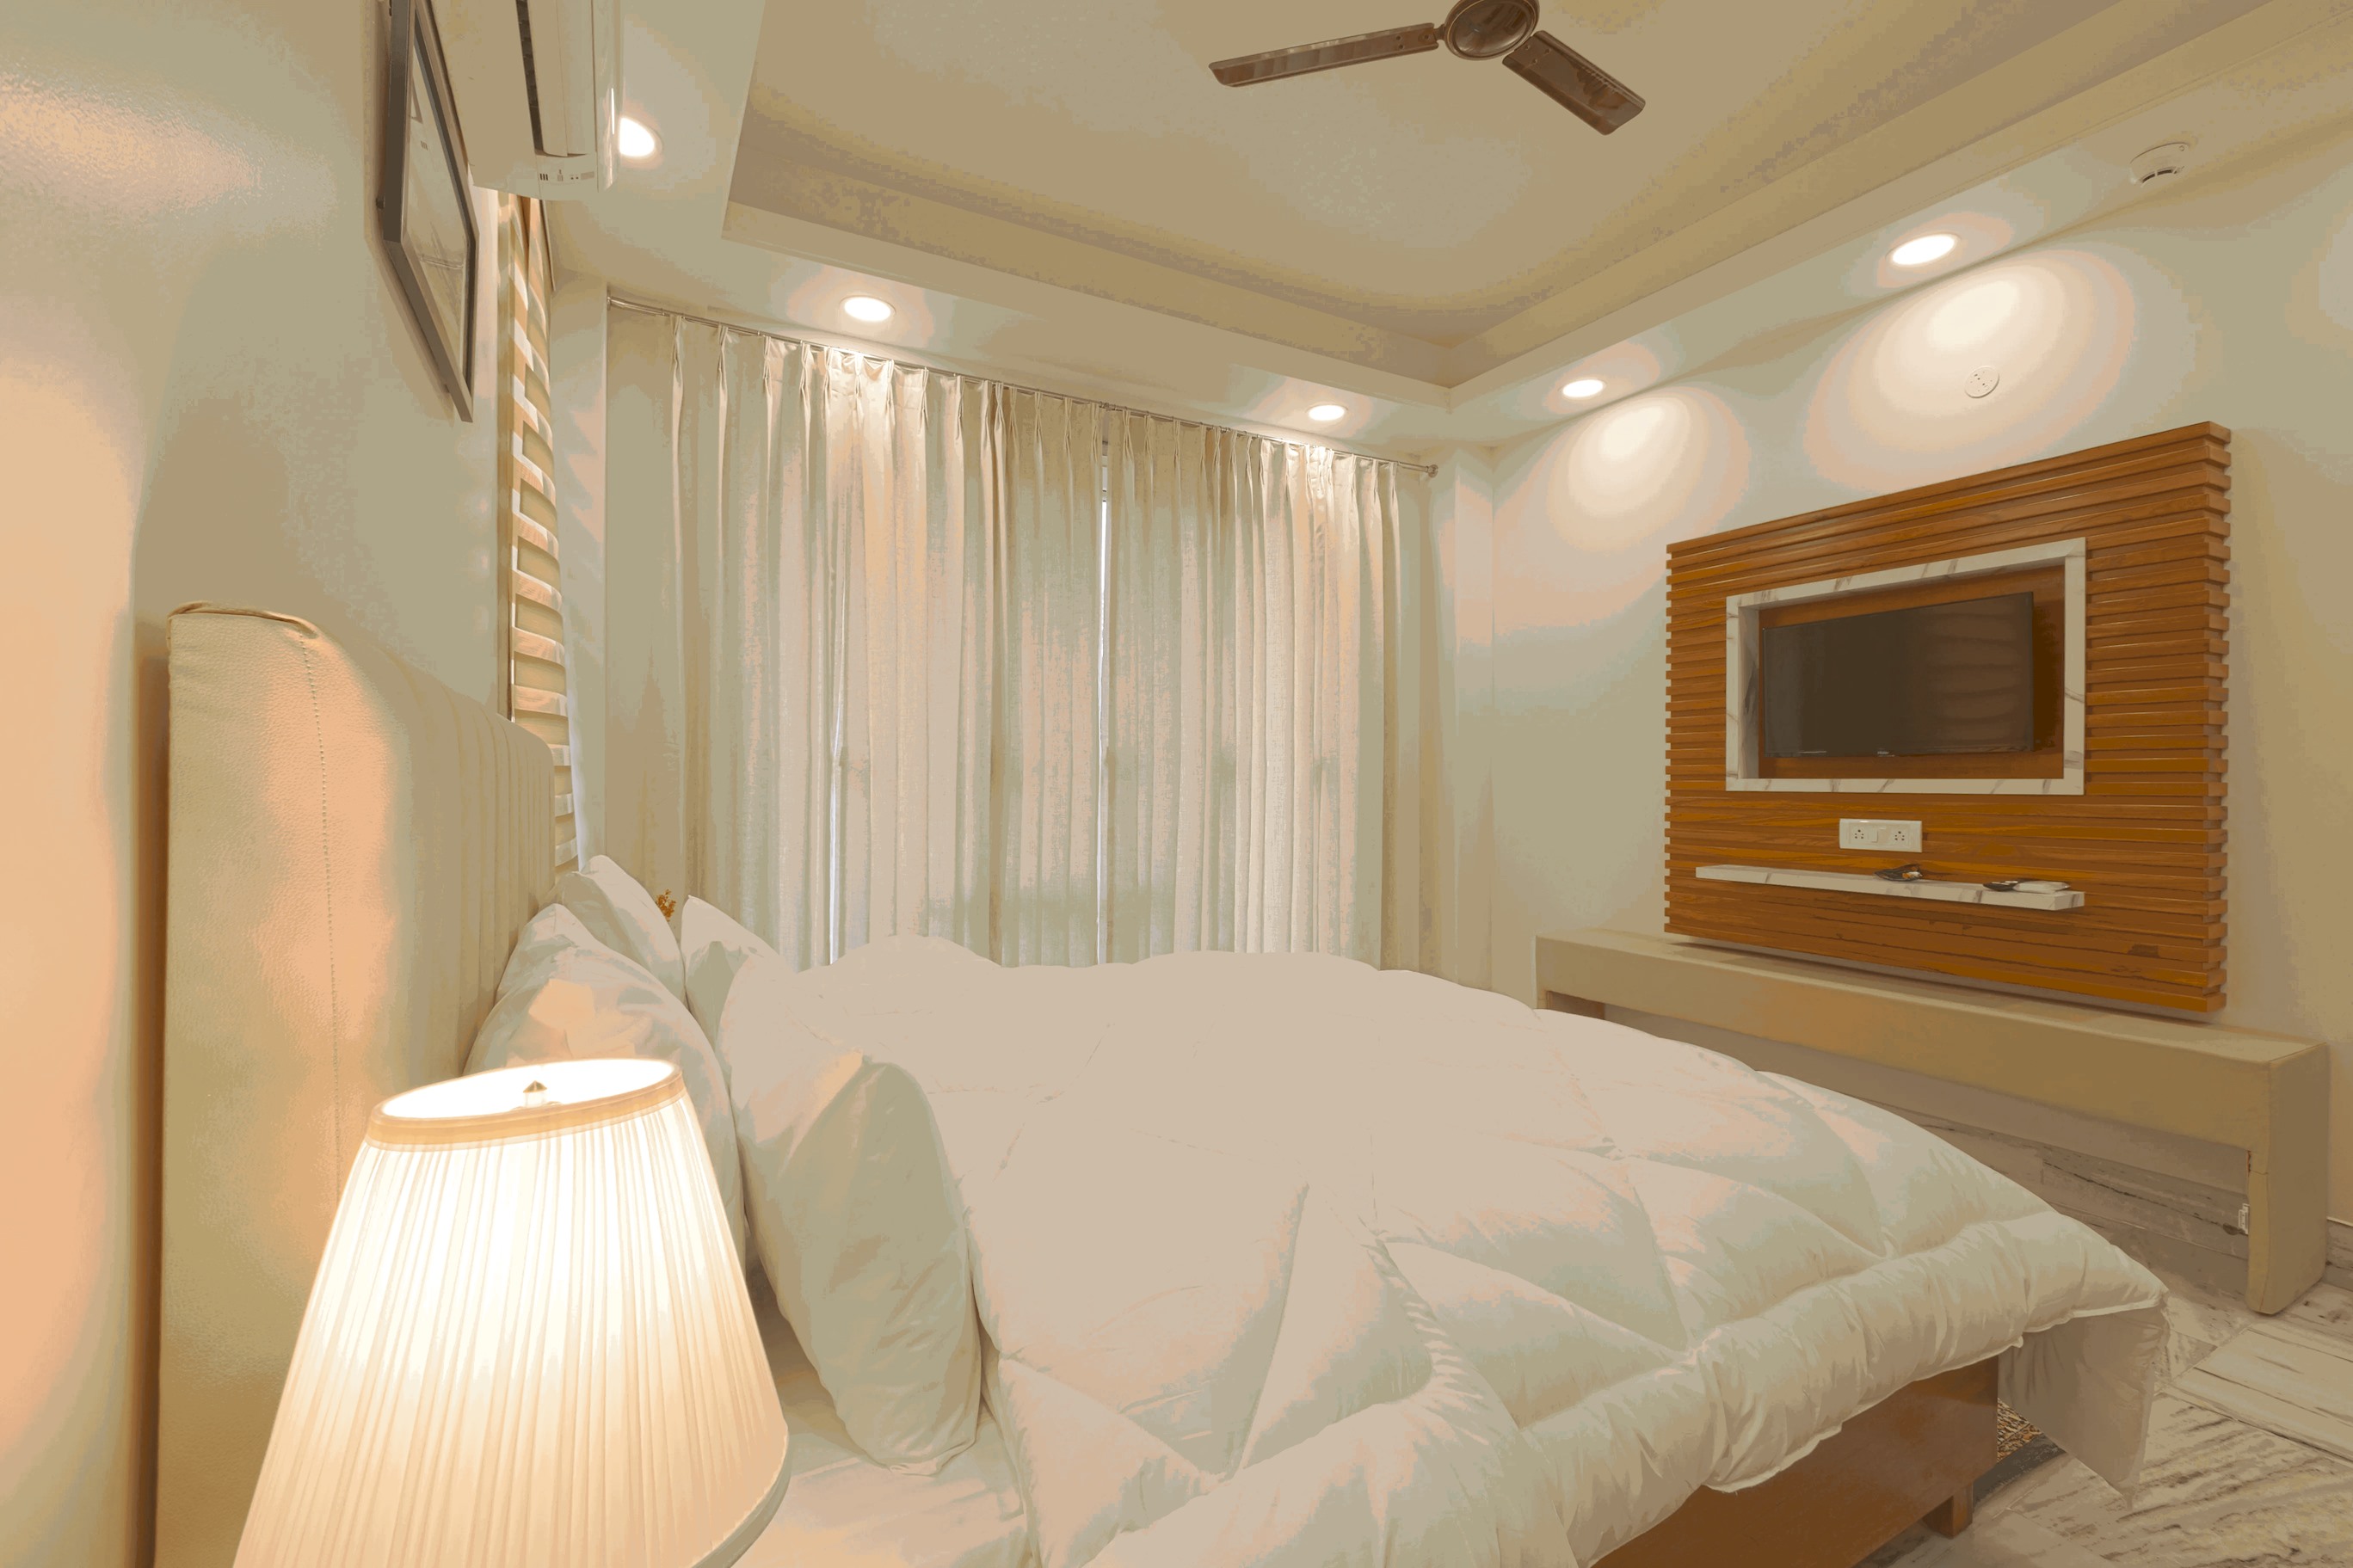 "Discover Serenity in This Well-Designed Bedroom: Elegant Decor, Comfortable Furnishings, and a Soothing Color Palette Await at Parfait Street."